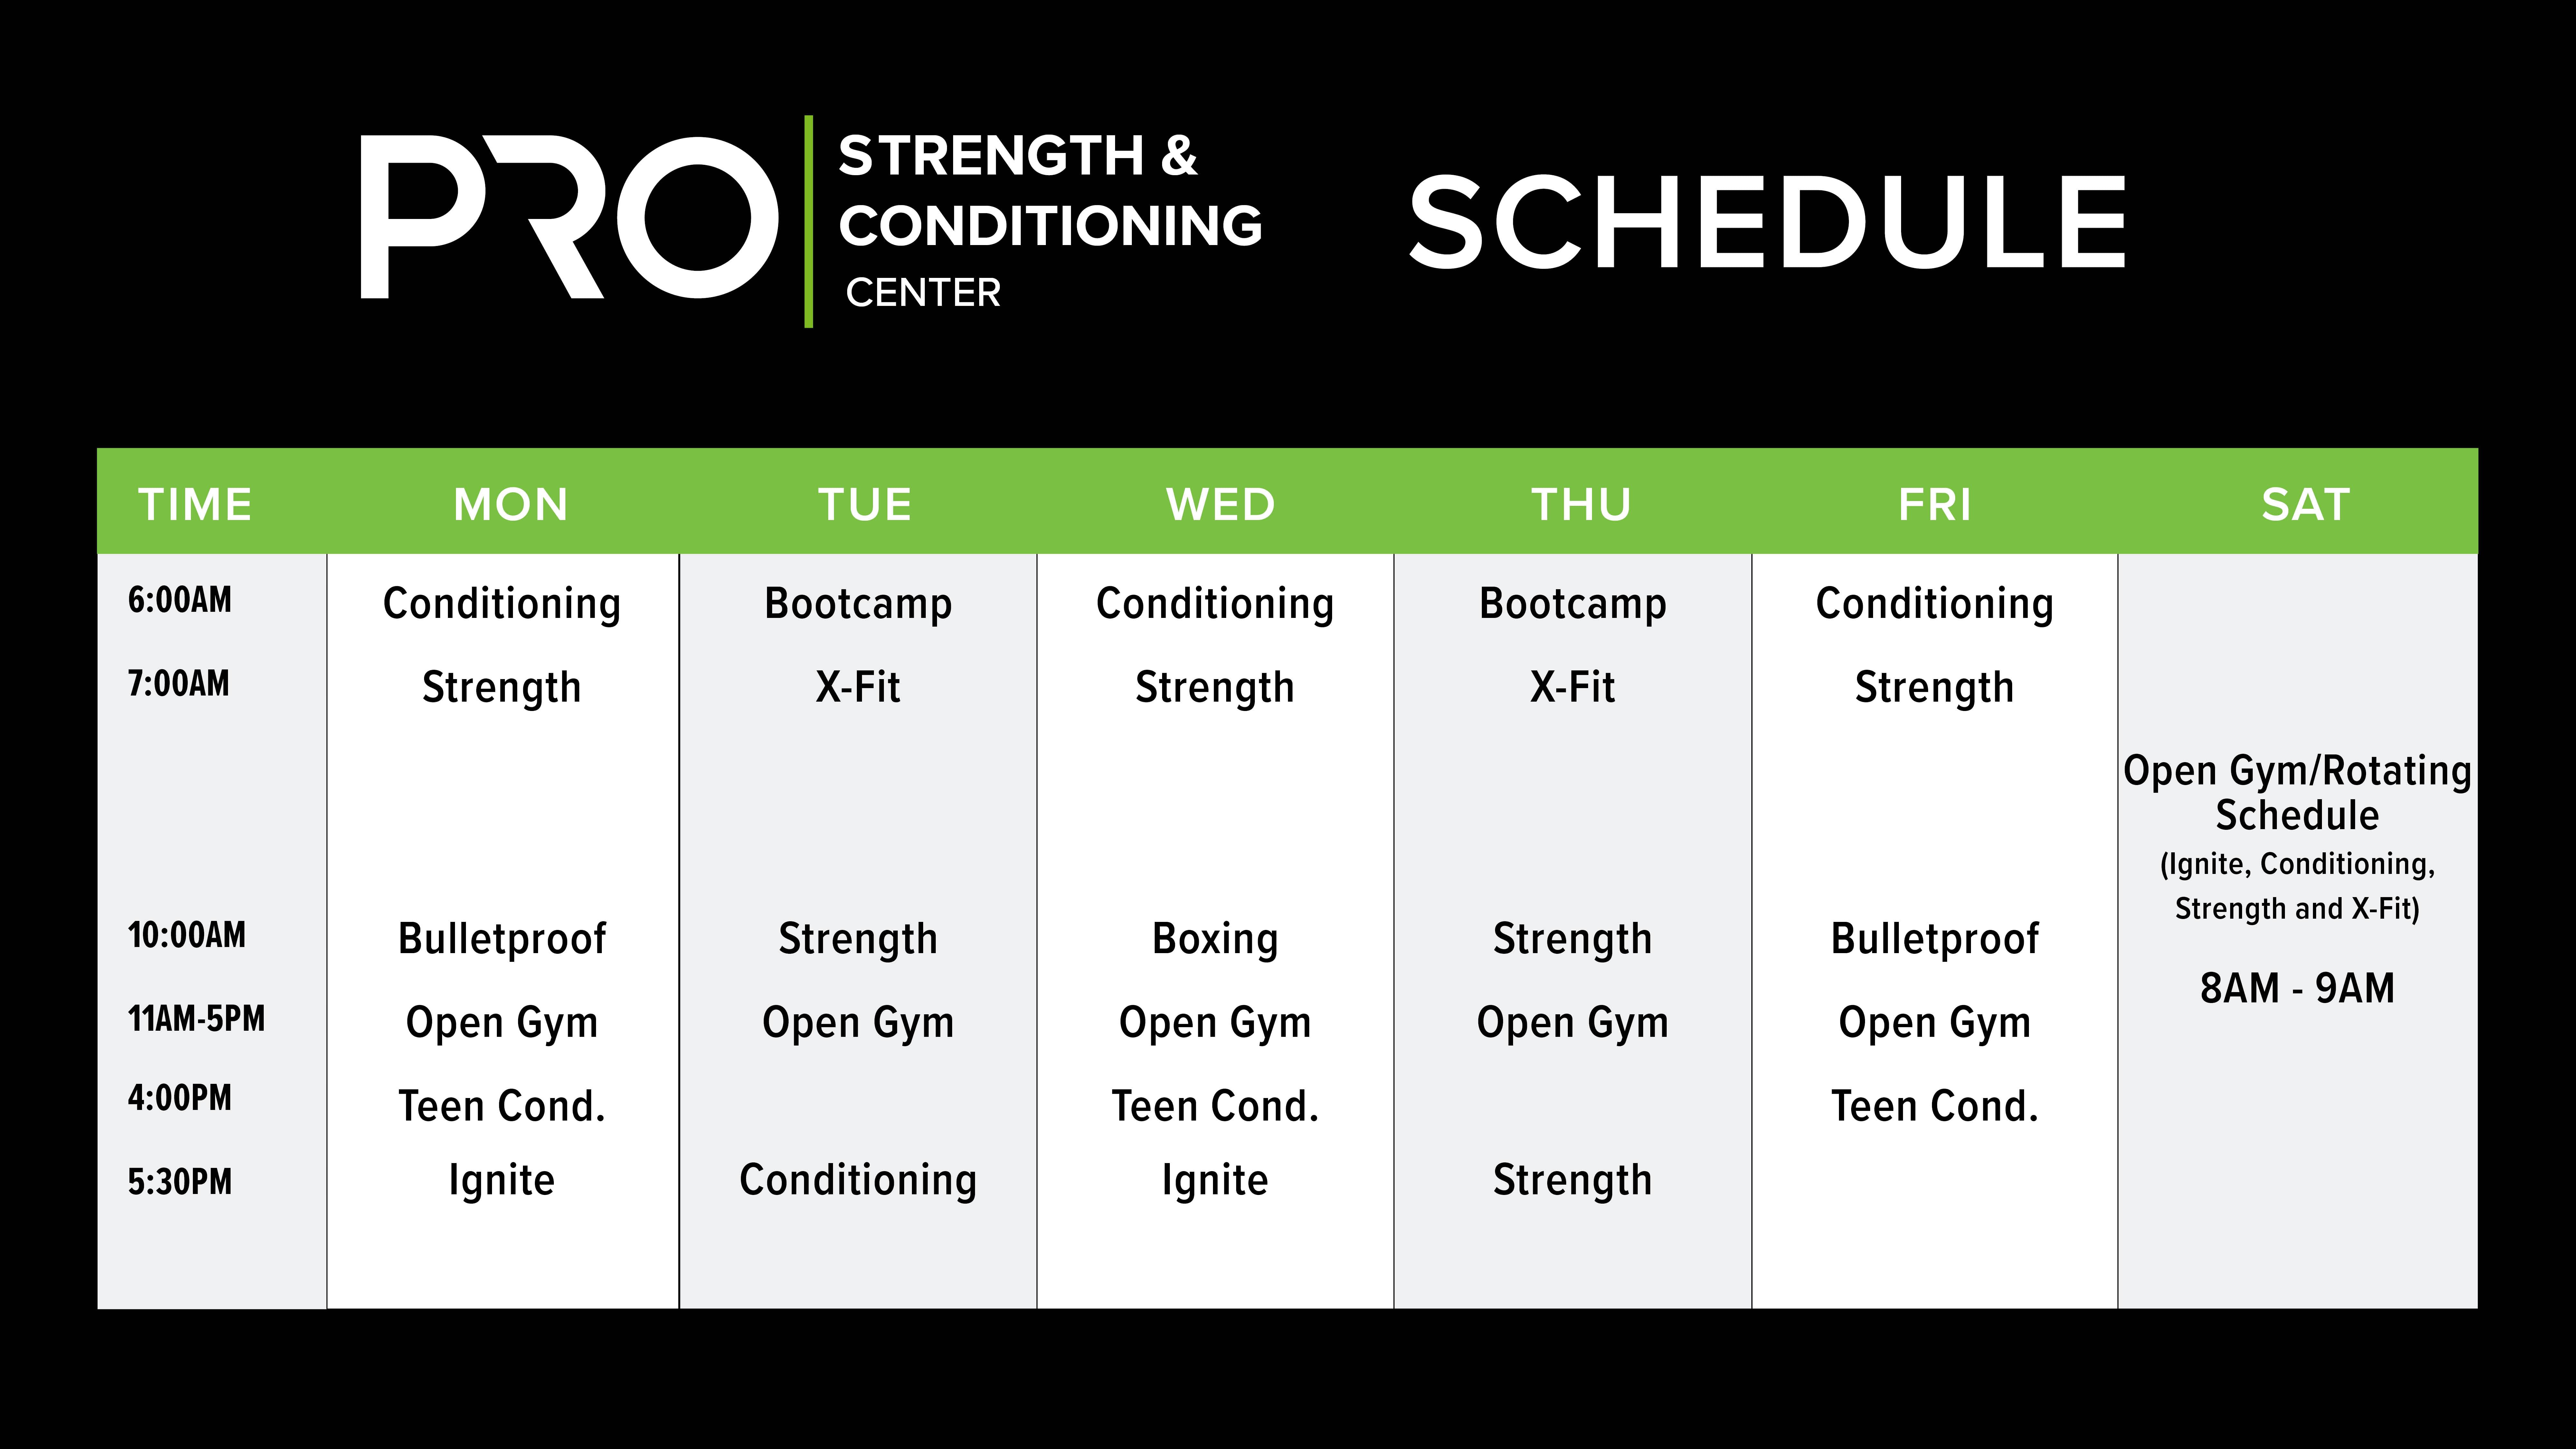 Strength and conditioning center schedule